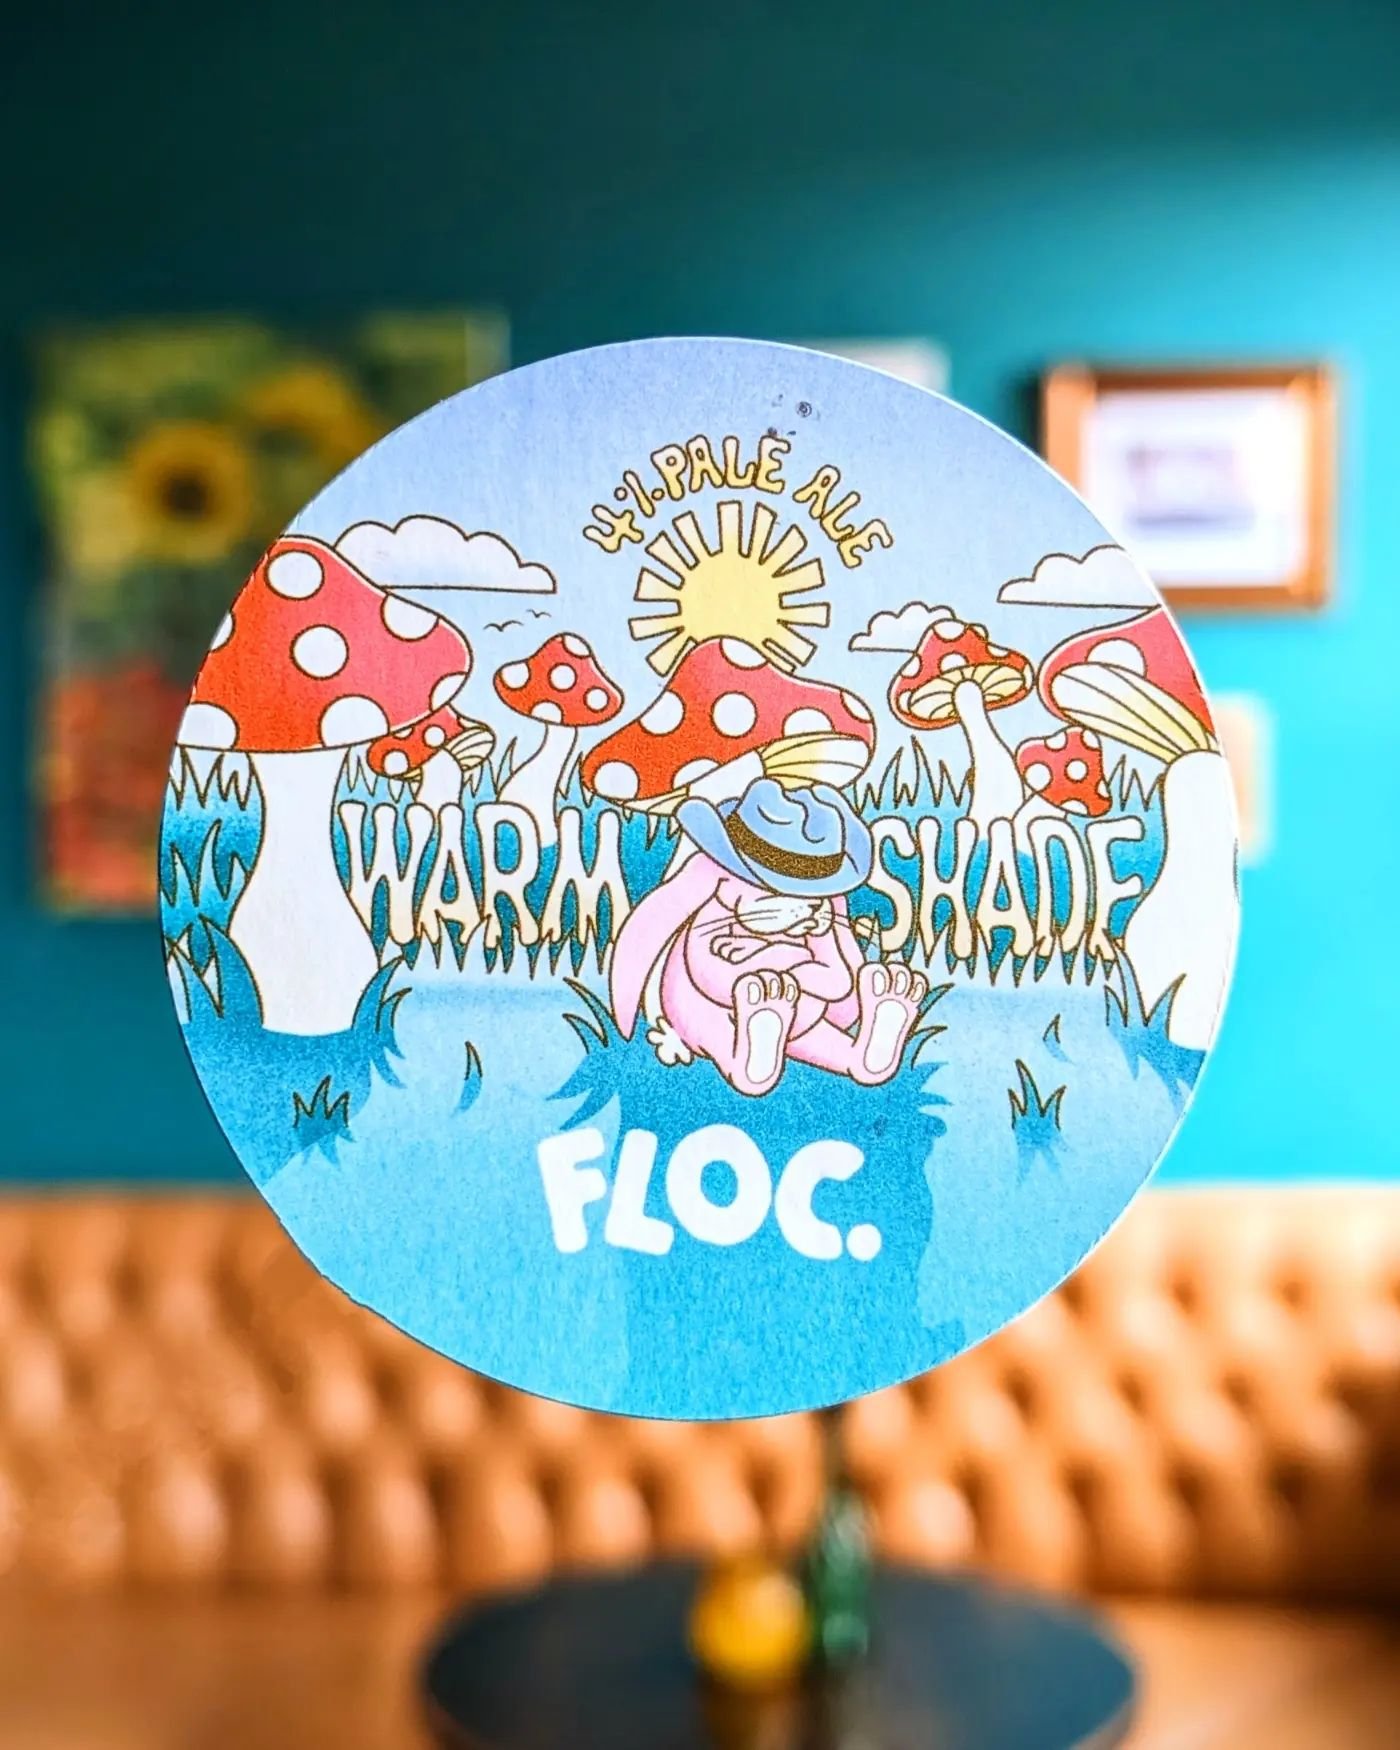 New on our taps is the Warm Shade. Full flavour, session percentage. It's only a small barrel so be quick about it.

Swipe to sneak peak our upcoming Cask beers.
#sessionpale #keg #cask